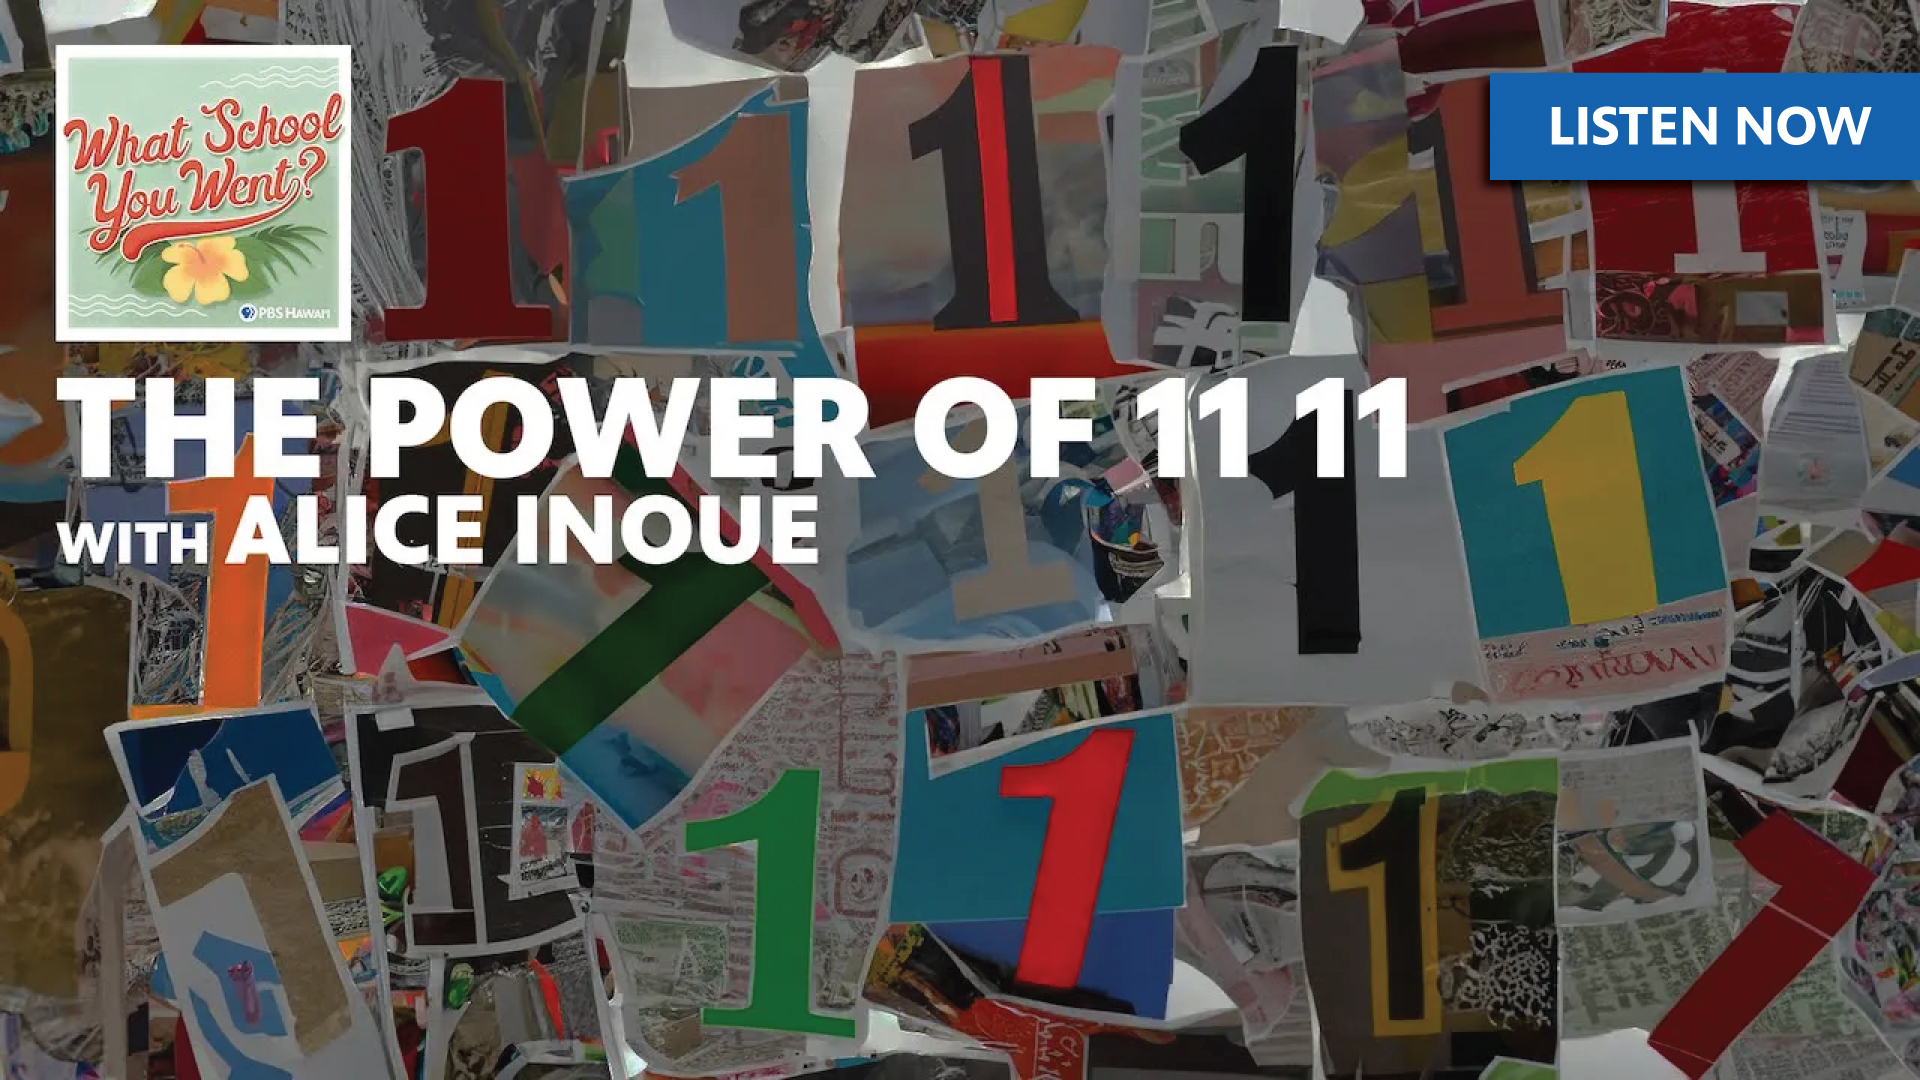 The Power of 11 11 with Alice Inoue